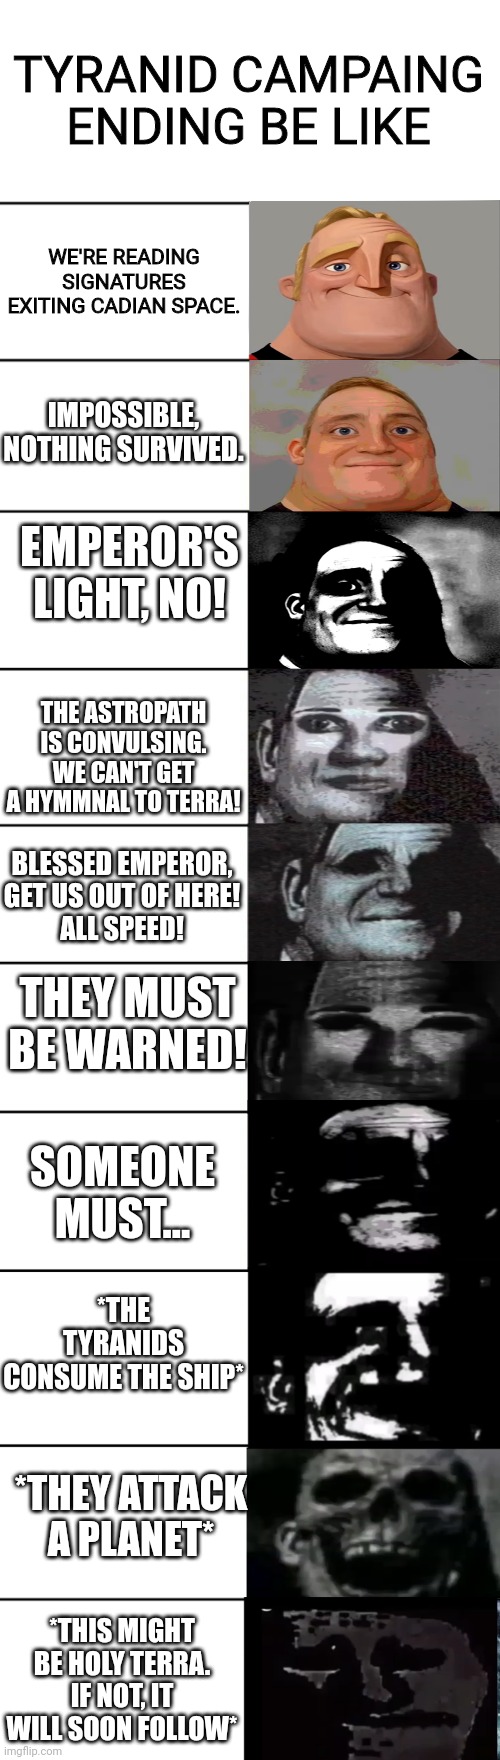 Damn... |  TYRANID CAMPAING ENDING BE LIKE; WE'RE READING SIGNATURES EXITING CADIAN SPACE. IMPOSSIBLE, NOTHING SURVIVED. EMPEROR'S LIGHT, NO! THE ASTROPATH IS CONVULSING. WE CAN'T GET A HYMMNAL TO TERRA! BLESSED EMPEROR, GET US OUT OF HERE!
ALL SPEED! THEY MUST BE WARNED! SOMEONE MUST... *THE TYRANIDS CONSUME THE SHIP*; *THEY ATTACK A PLANET*; *THIS MIGHT BE HOLY TERRA. IF NOT, IT WILL SOON FOLLOW* | image tagged in mr incredible becoming uncanny,warhammer40k,tyranid | made w/ Imgflip meme maker